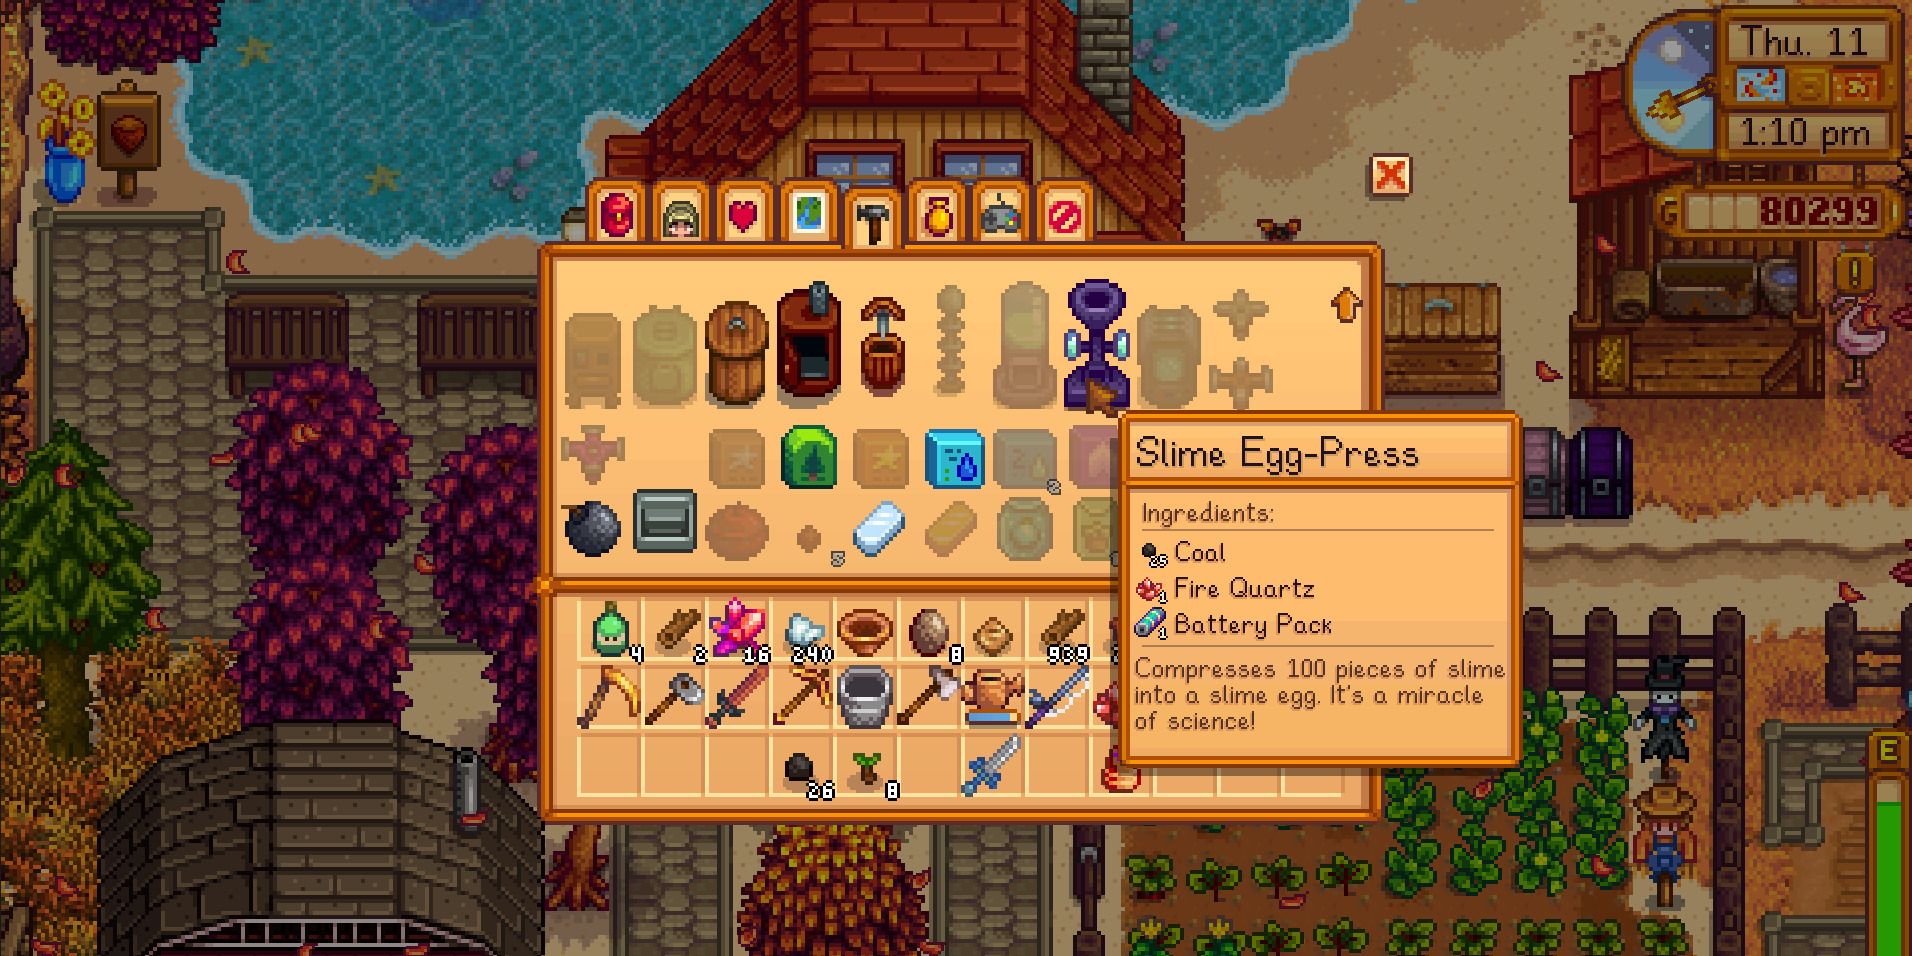 Image of a Slime Egg-Press recipe in Stardew Valley